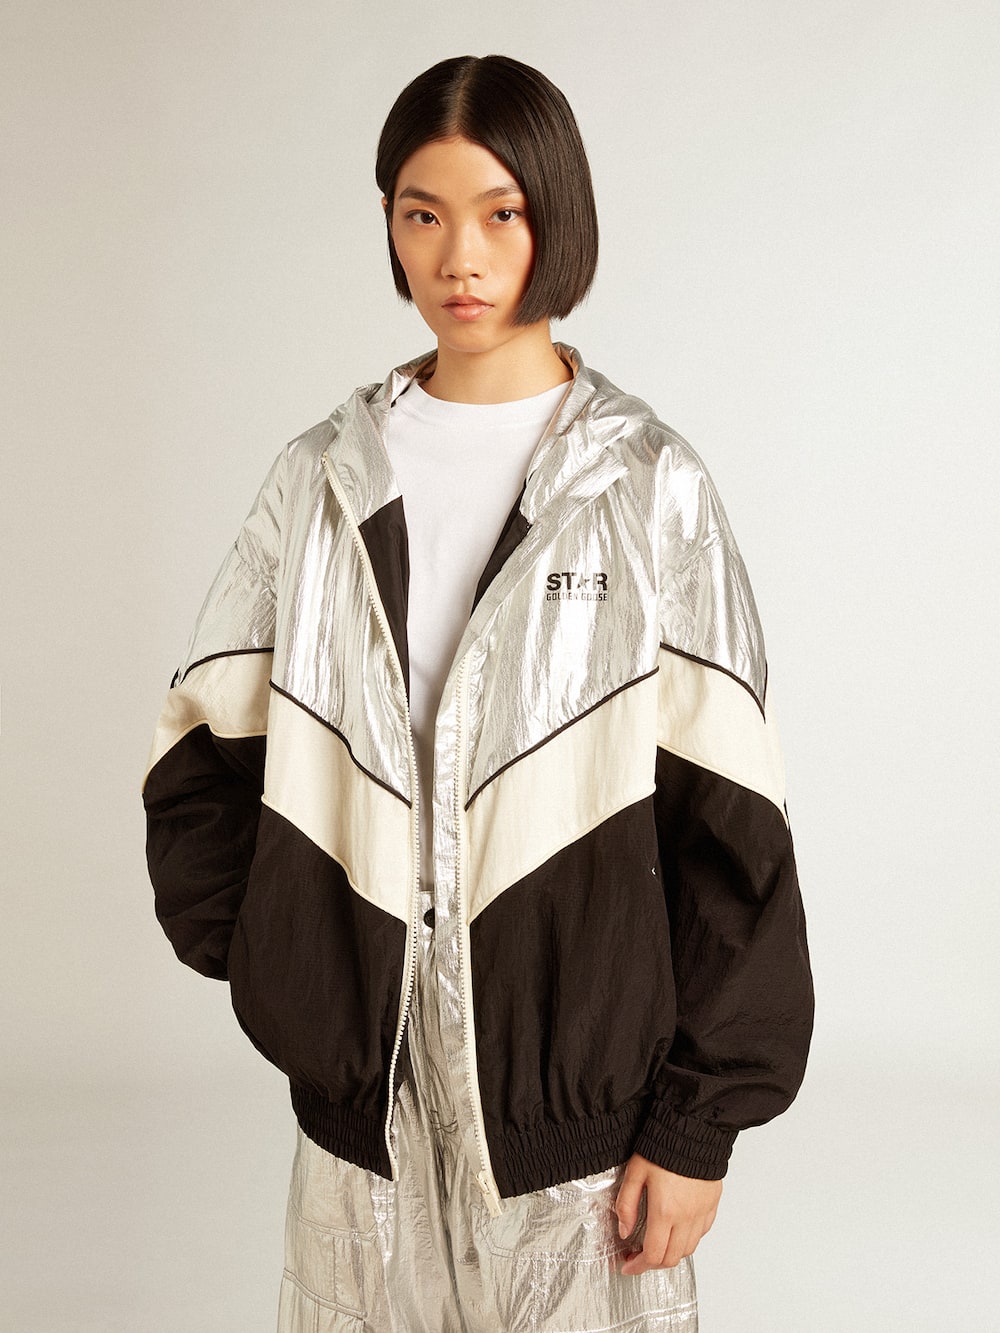 Golden Goose - Women's windcheater in silver and black technical fabric in 